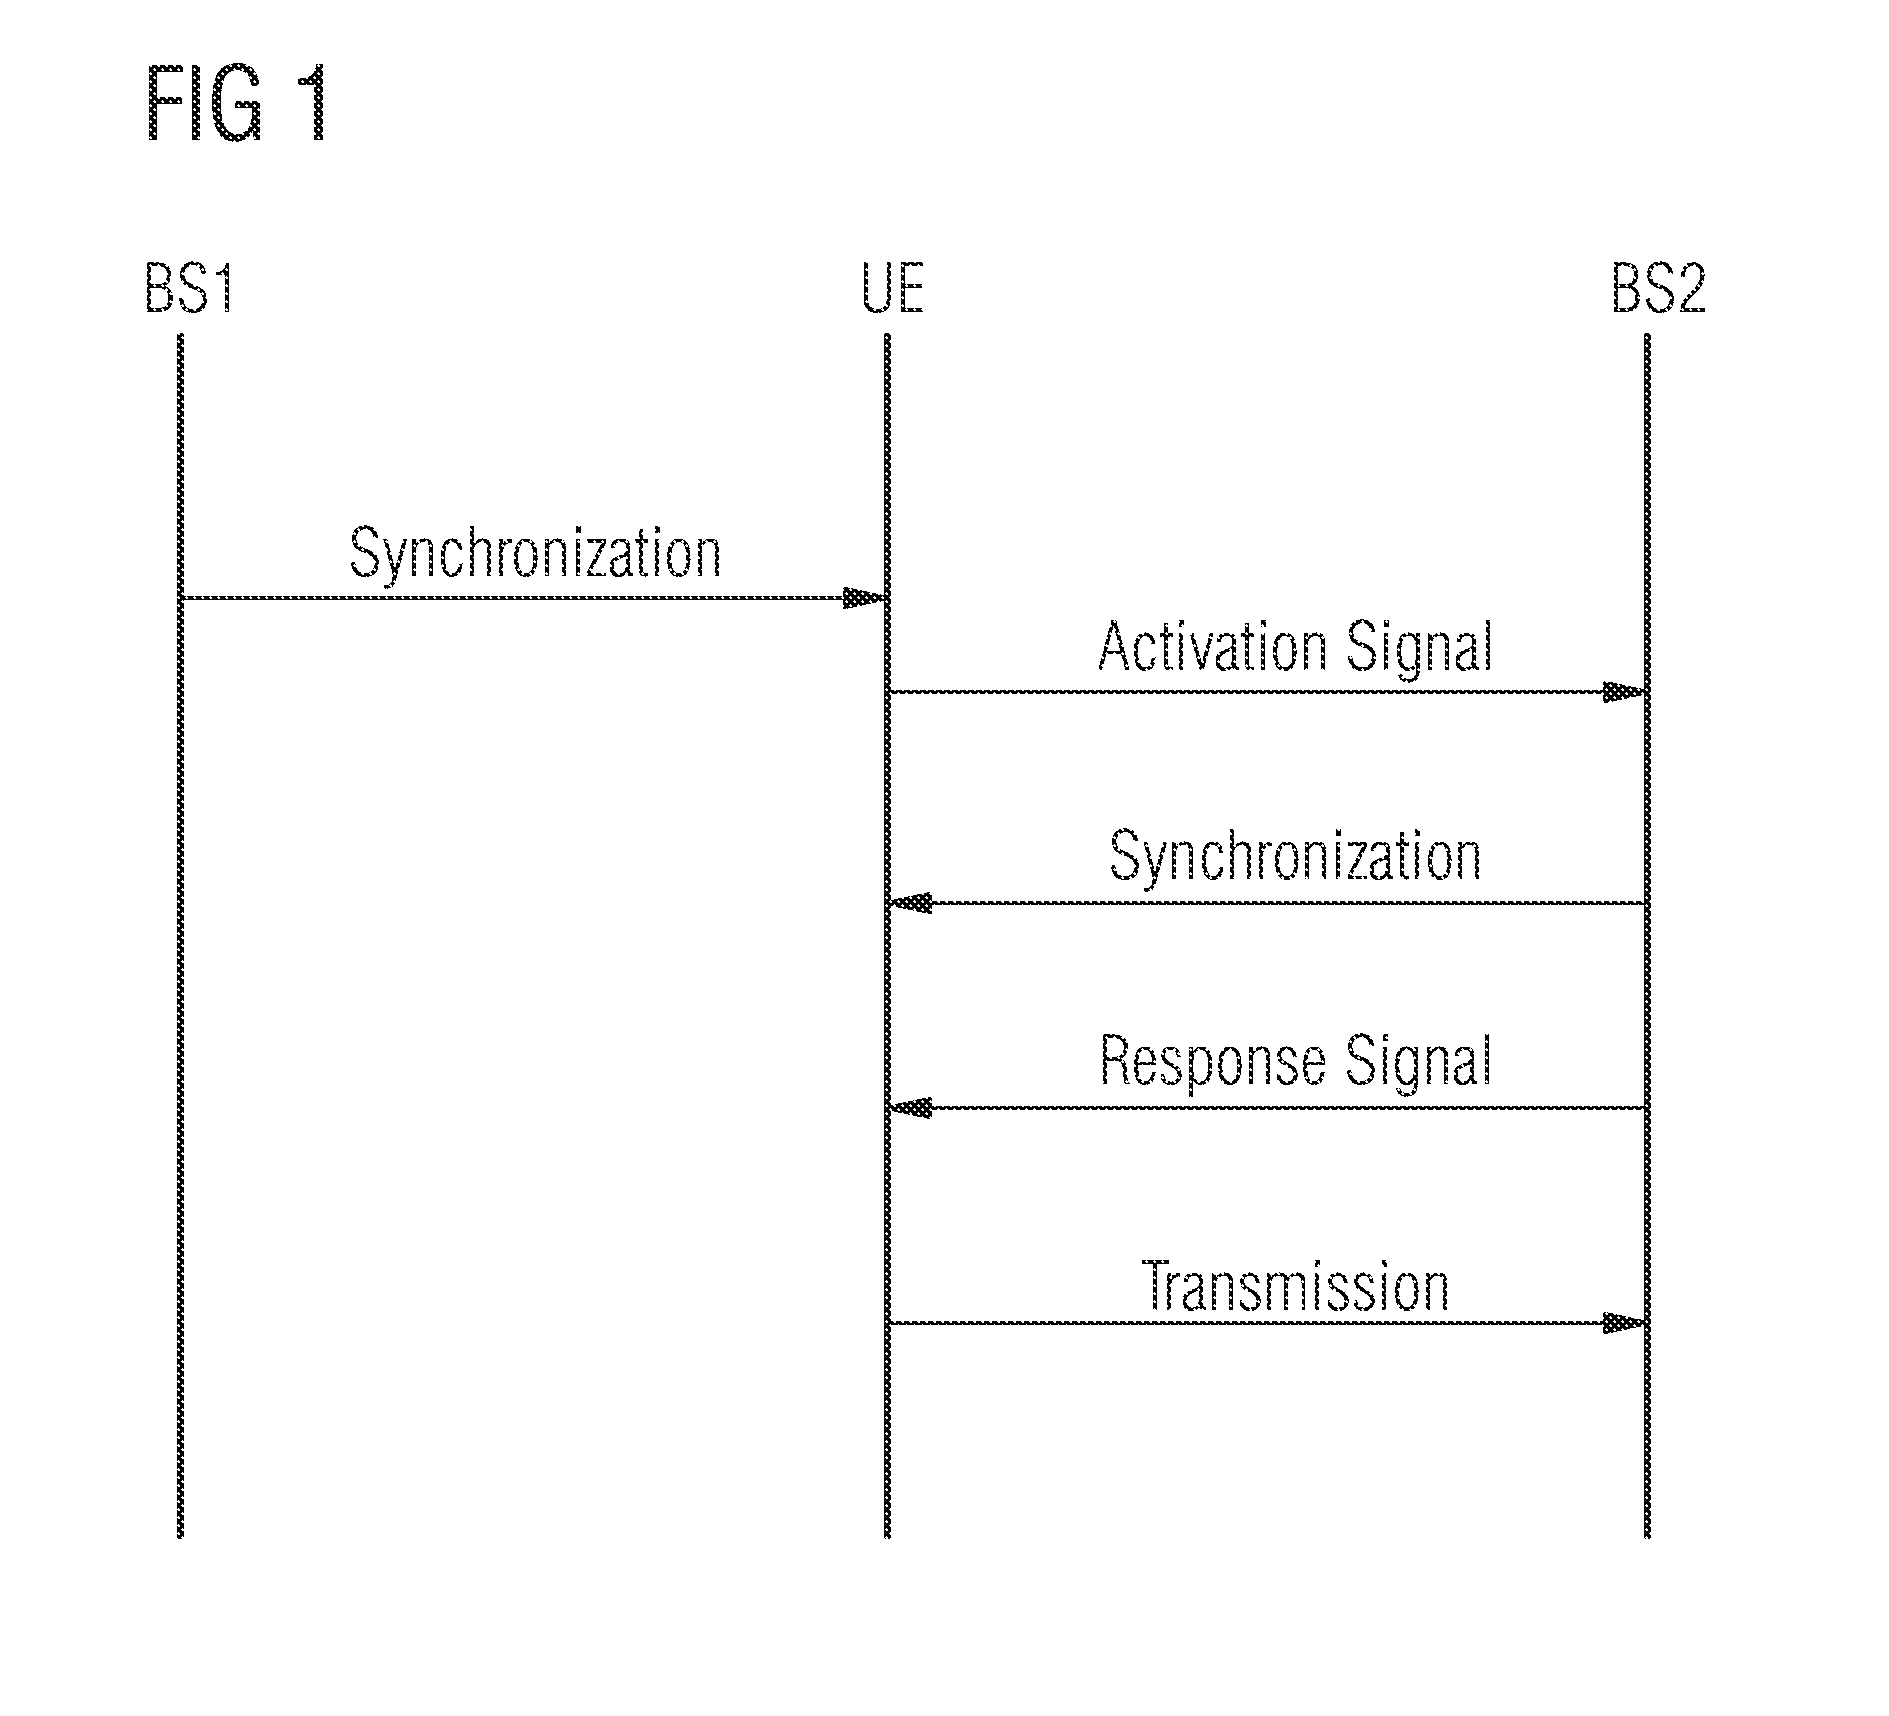 Method for Transferring a Base Station of a Wireless Communication Network from a Standby Mode to a Fully Activated Mode